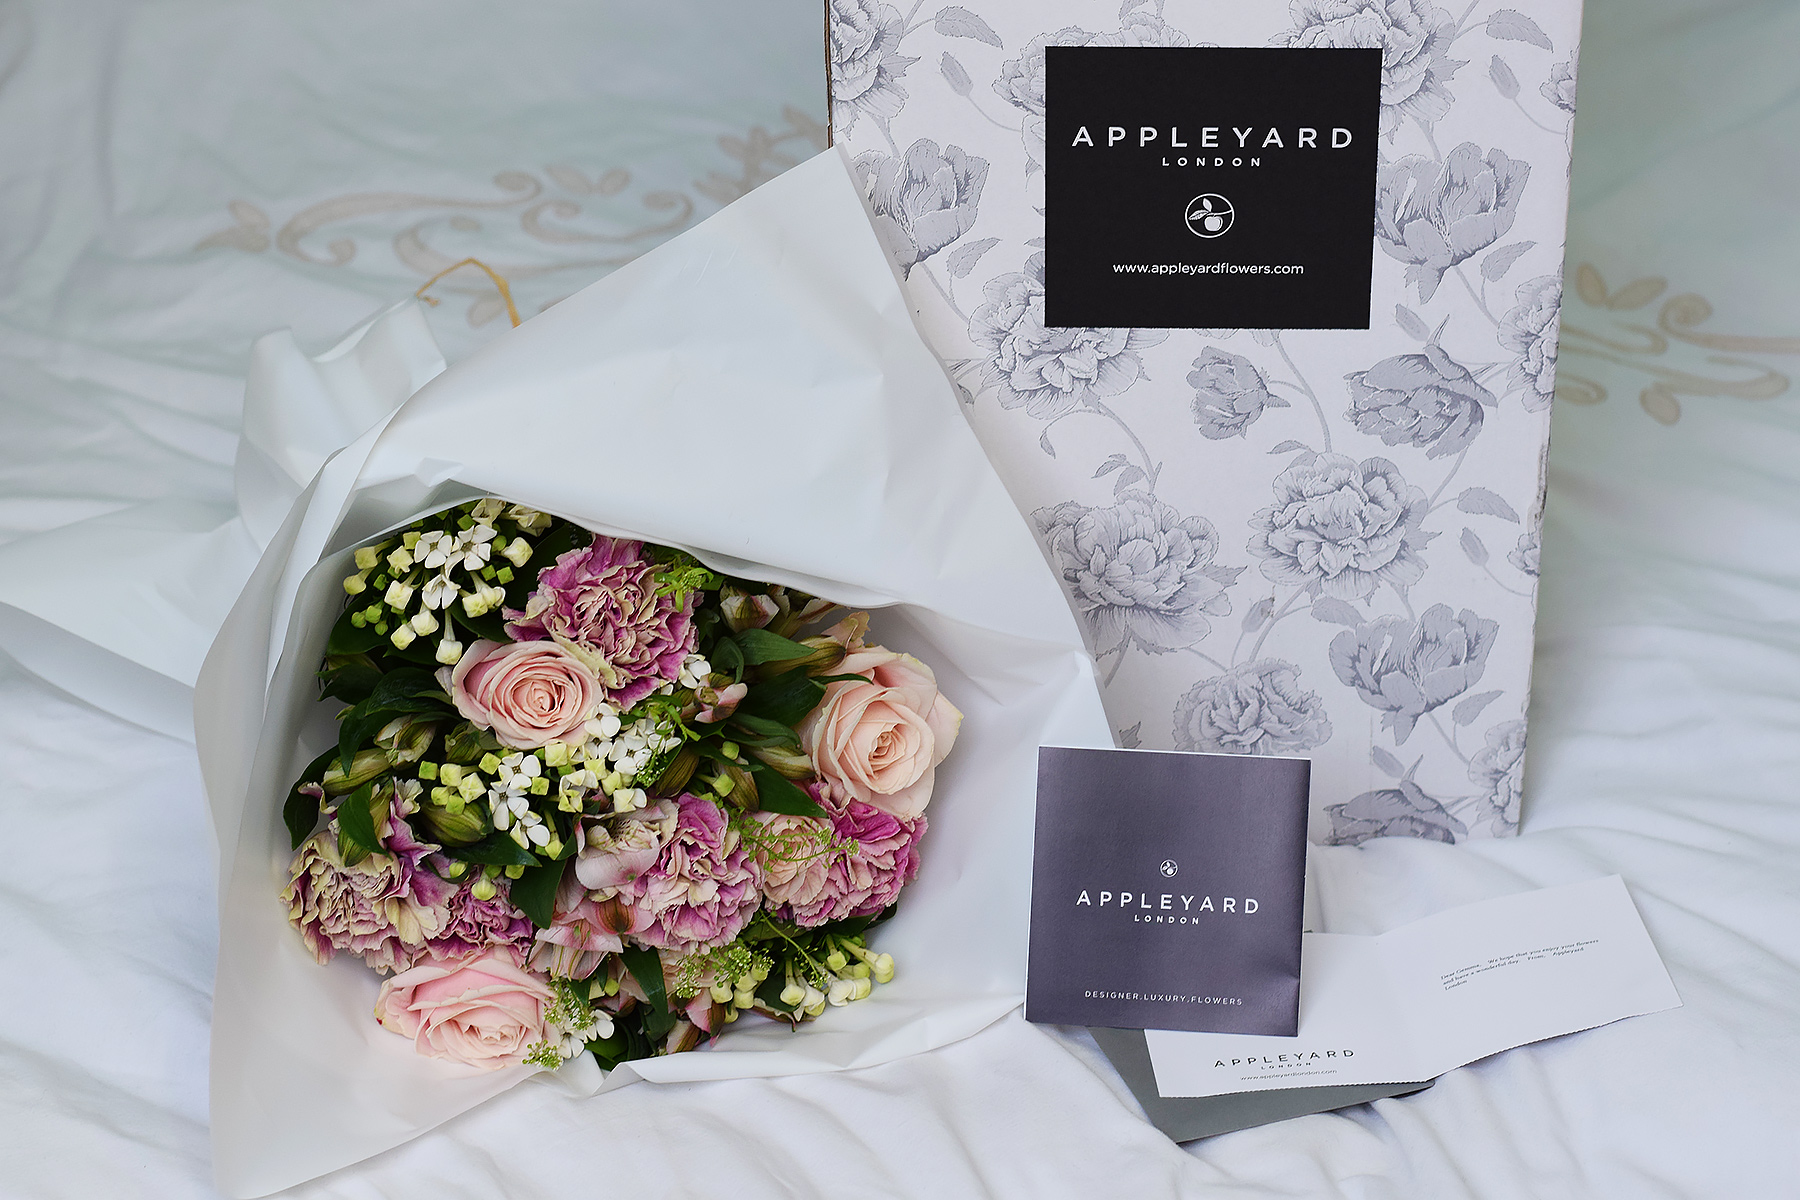 MOTHERS DAY FLOWERS WITH APPLEYARD LONDON